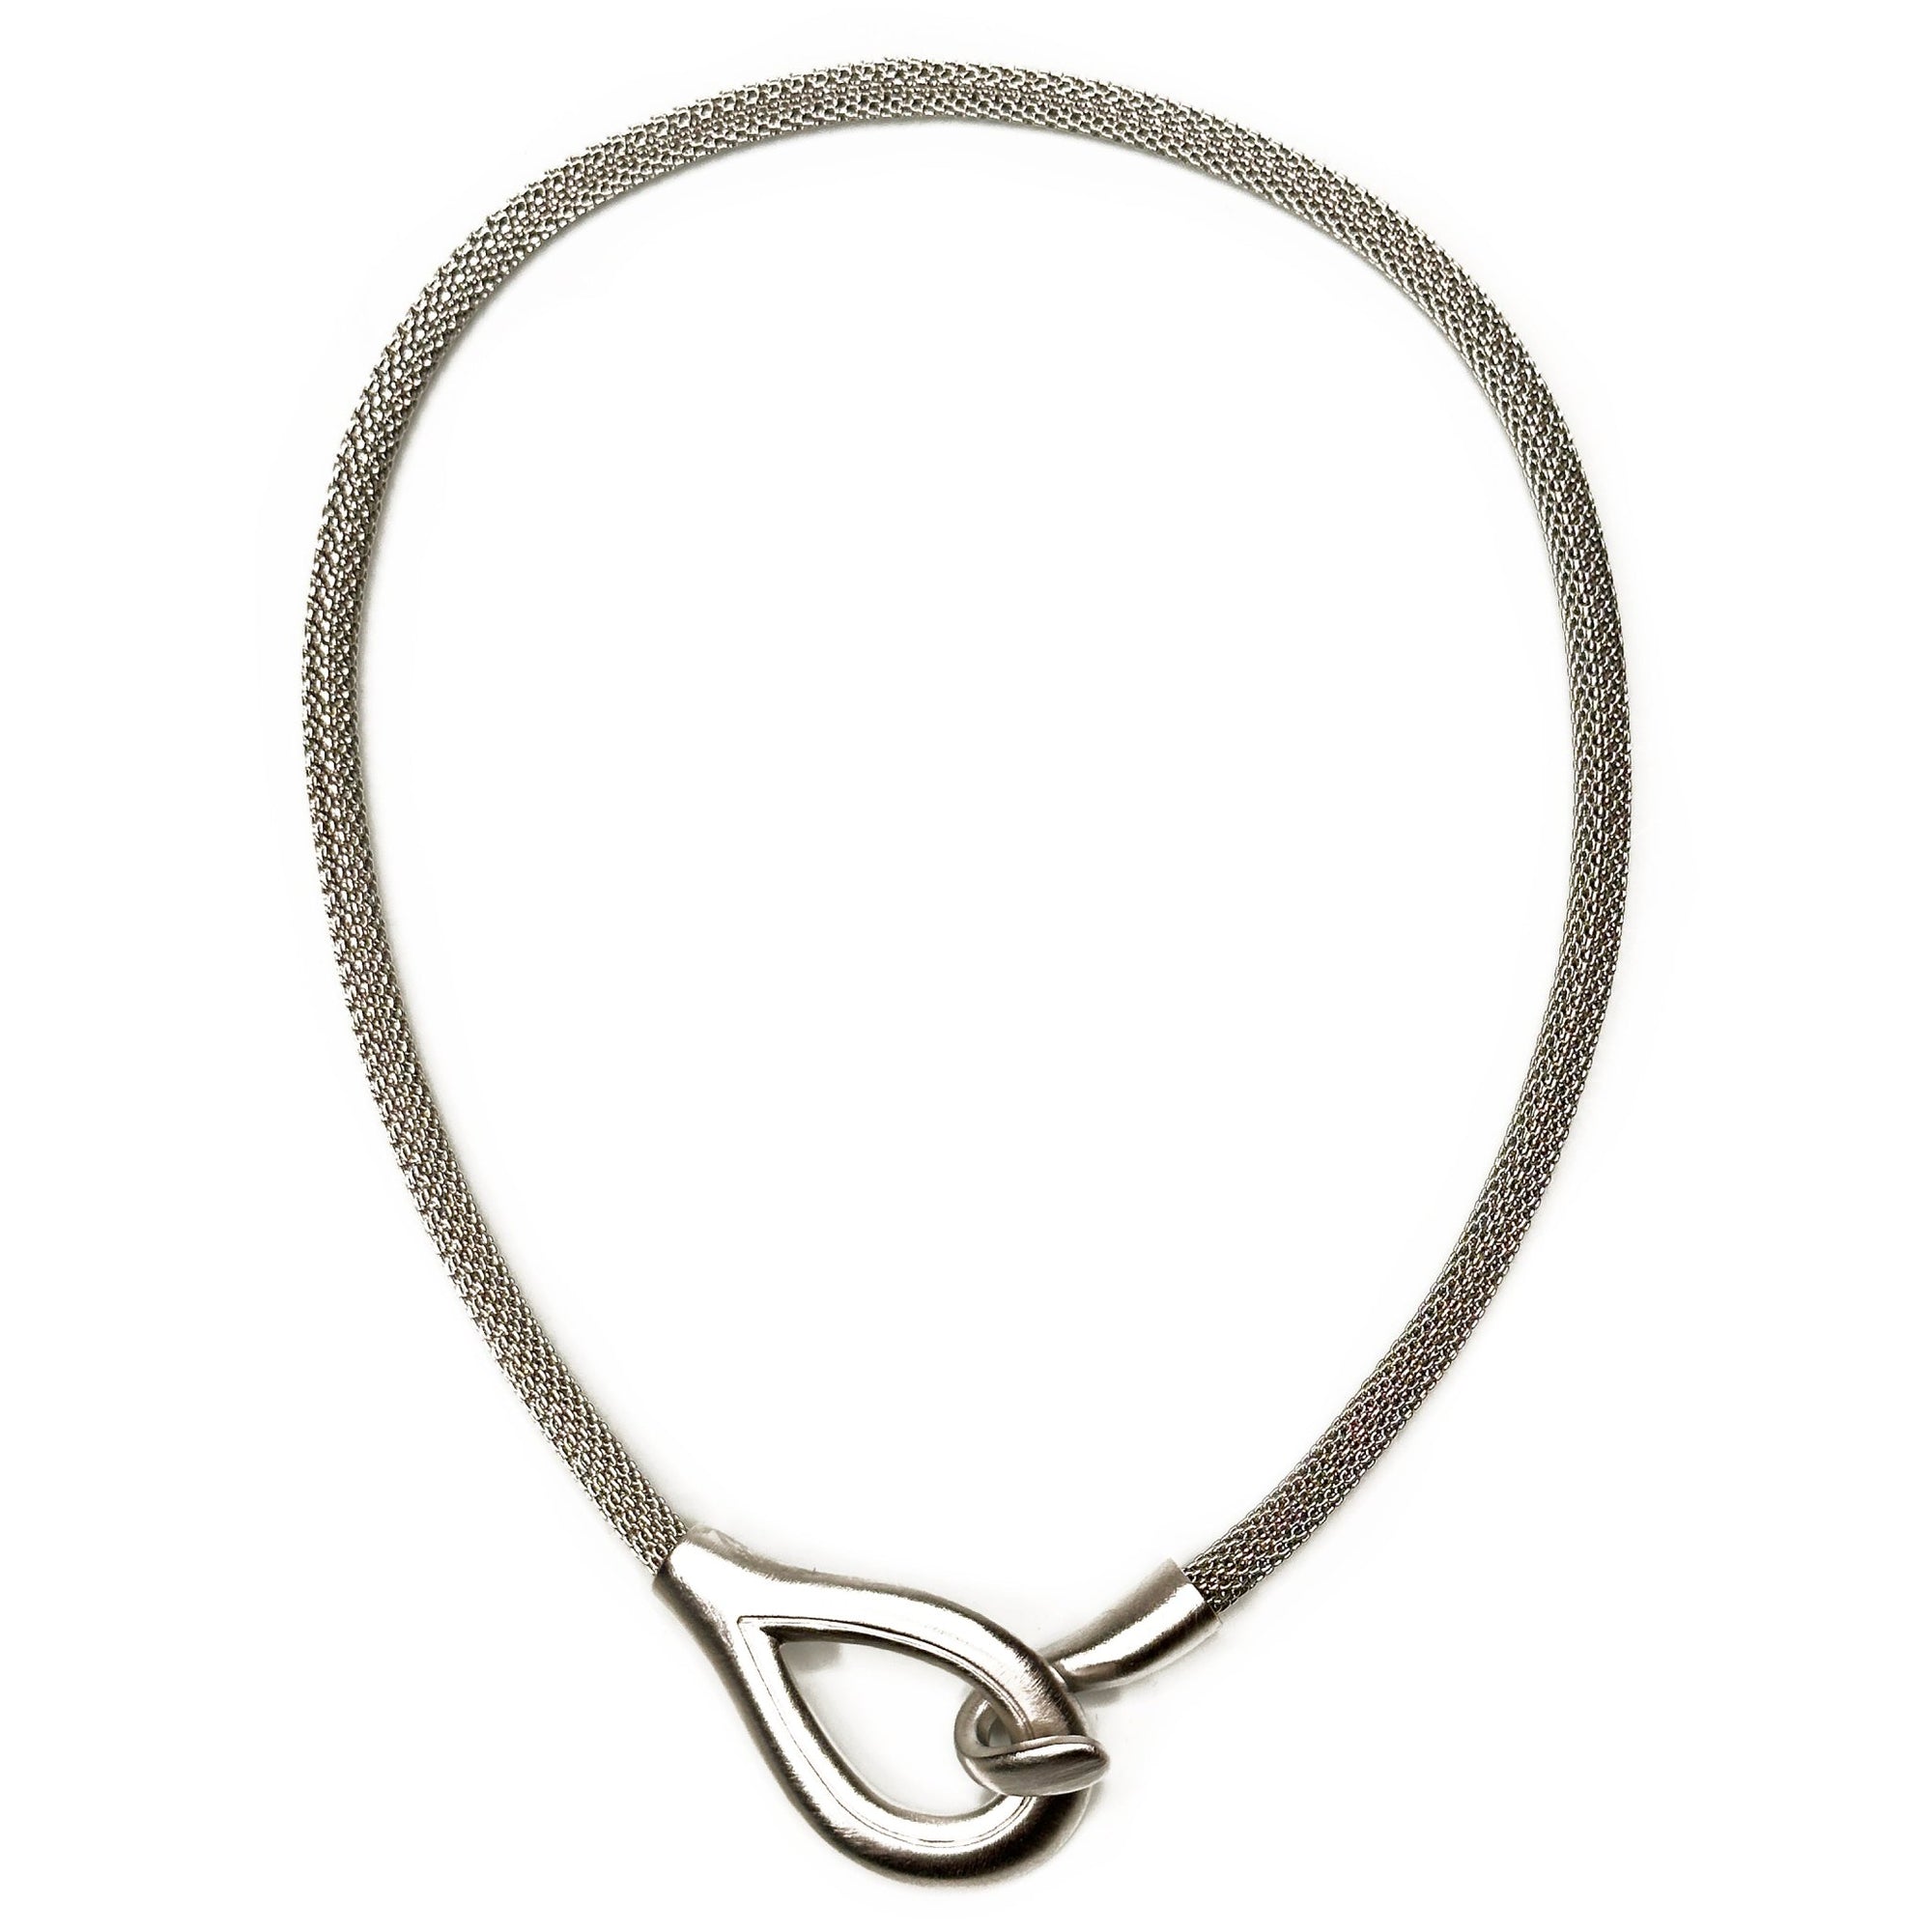 Mesh Necklace with Teardrop Hook Clasp